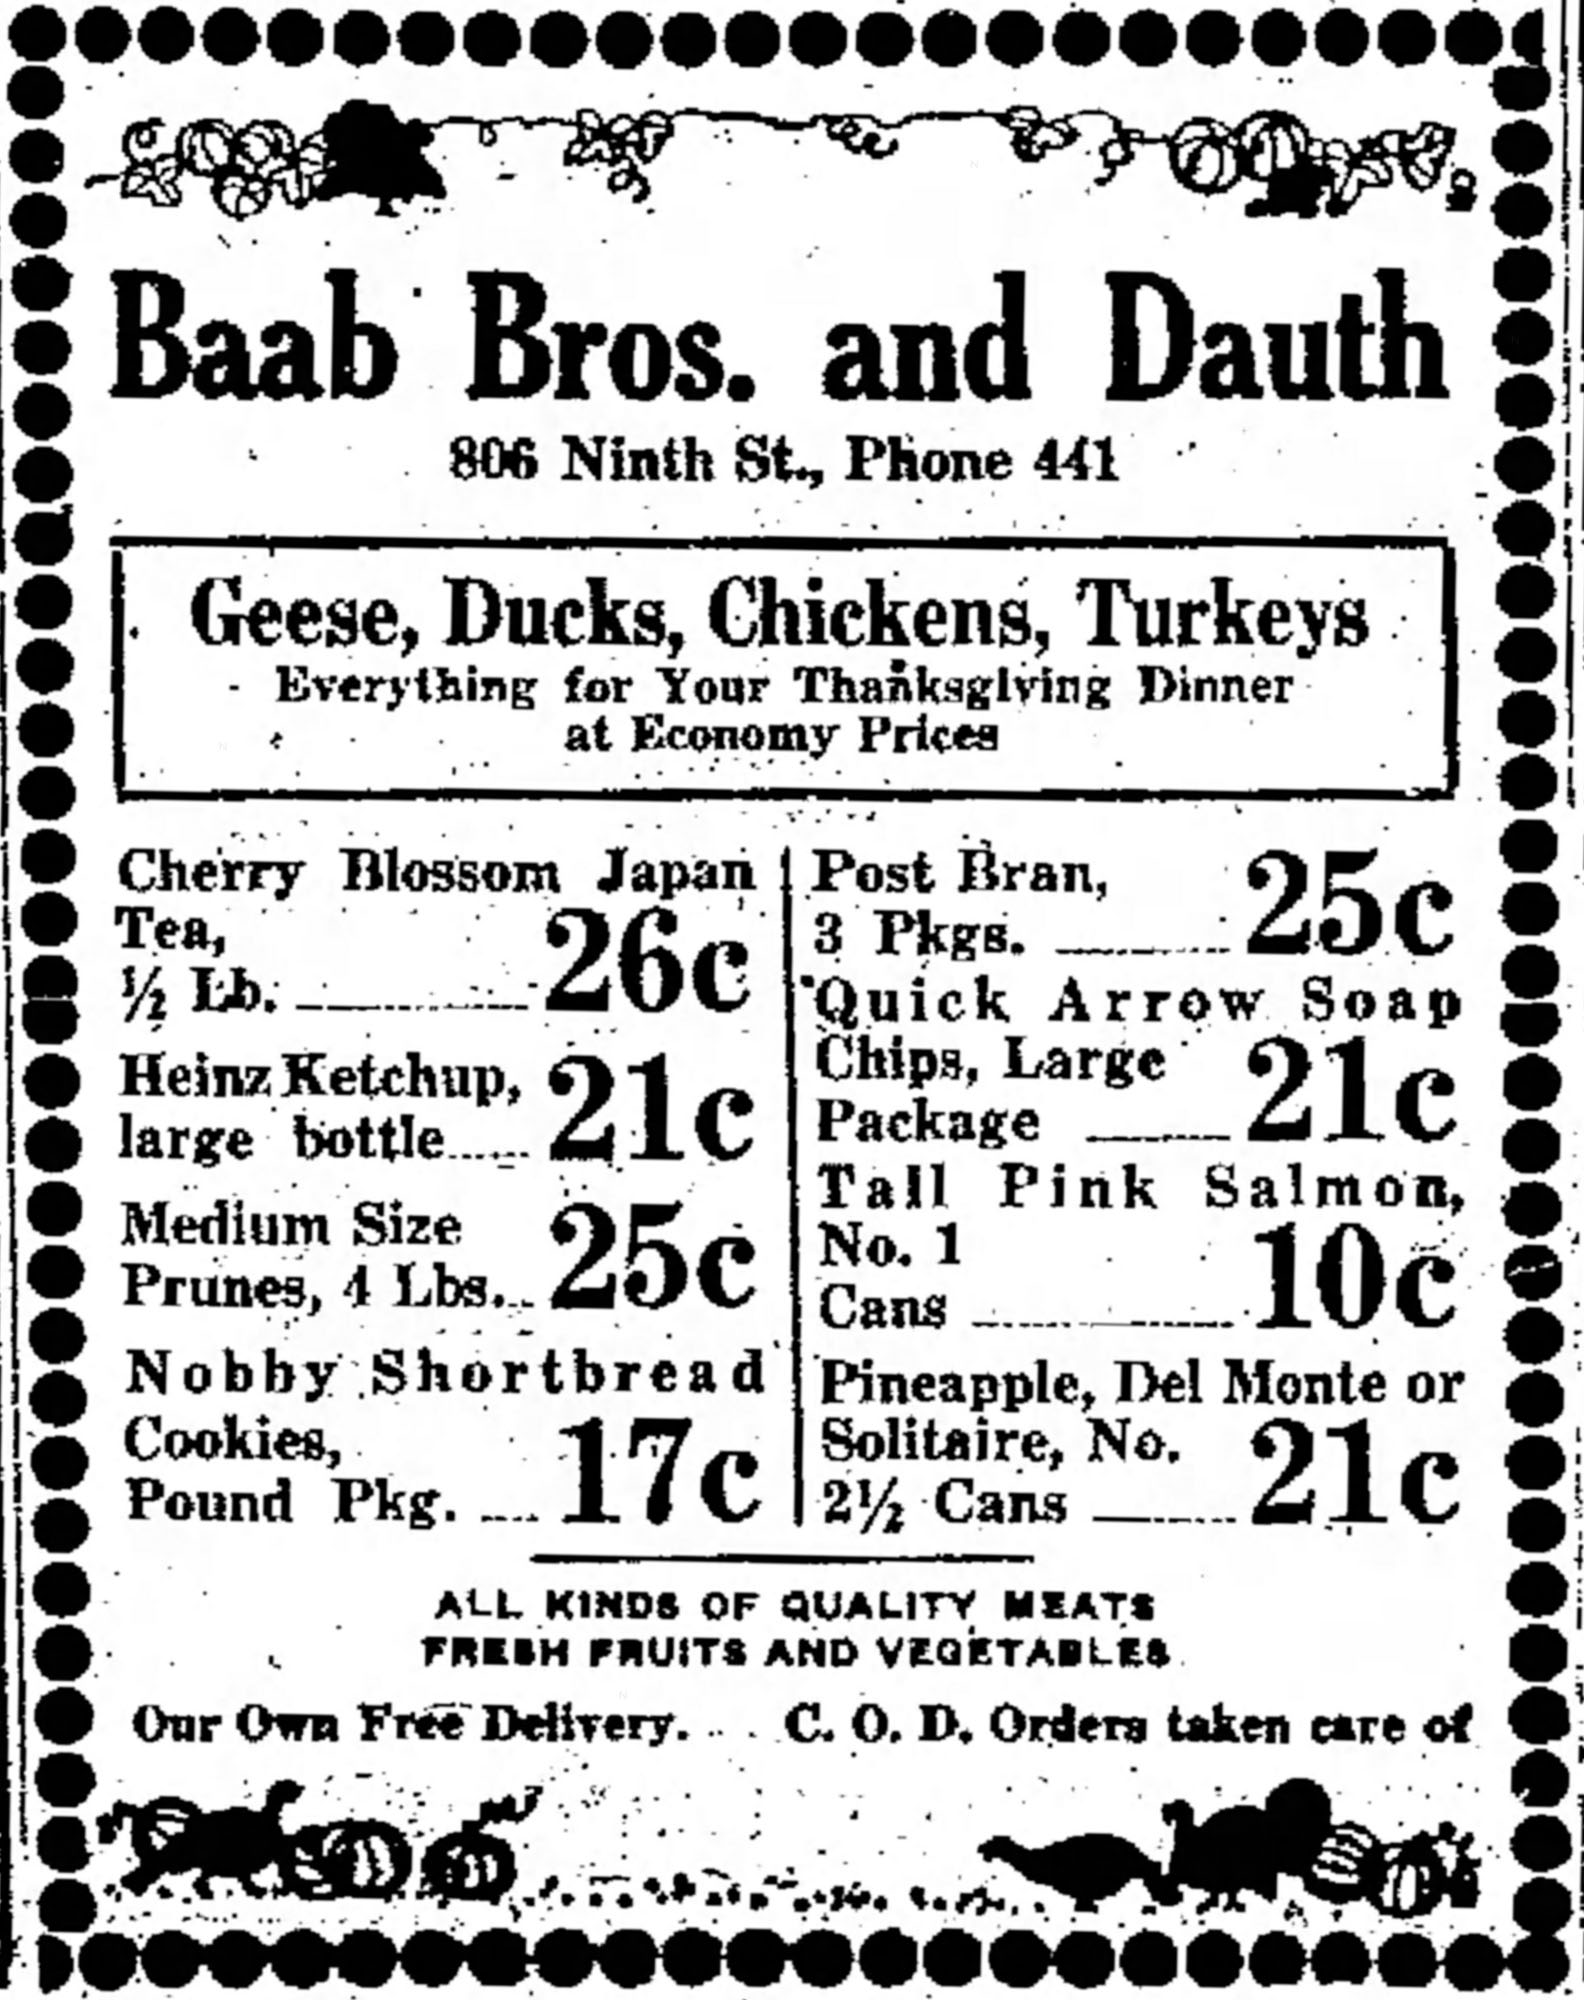 Dauth Family Archive - 1932-11-18 - Greeley Daily Tribune - Baab Bros and Dauth Advertisement